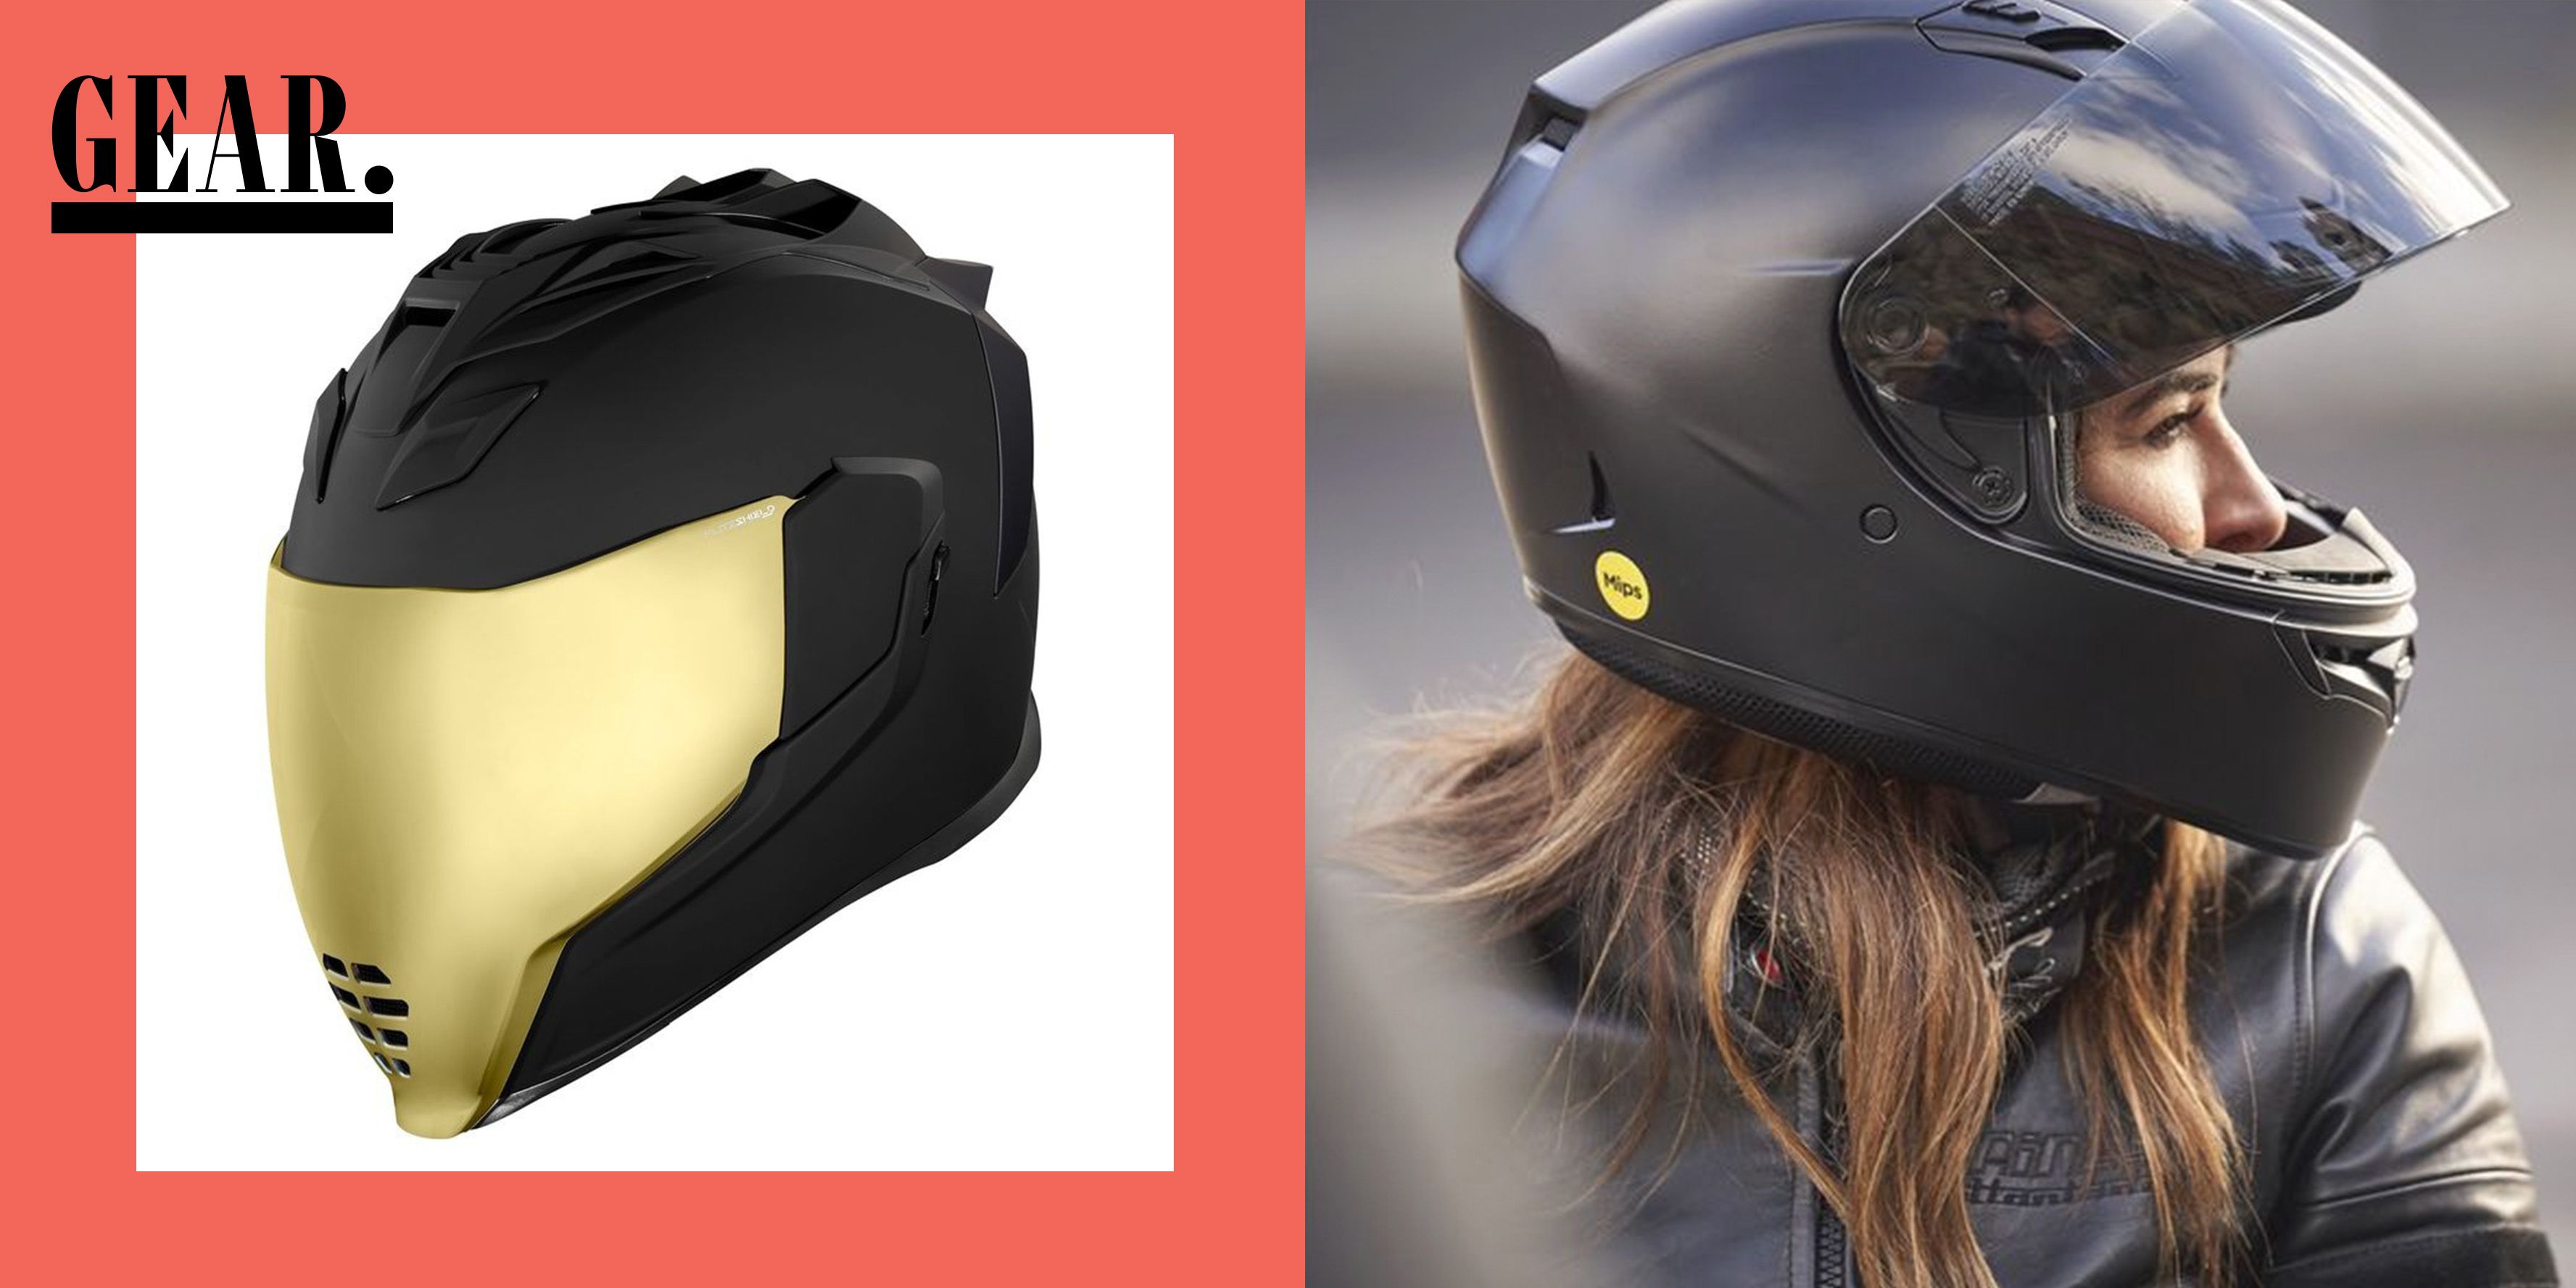 What's the Best Motorcycle Helmet You Can Buy? We Asked the Experts